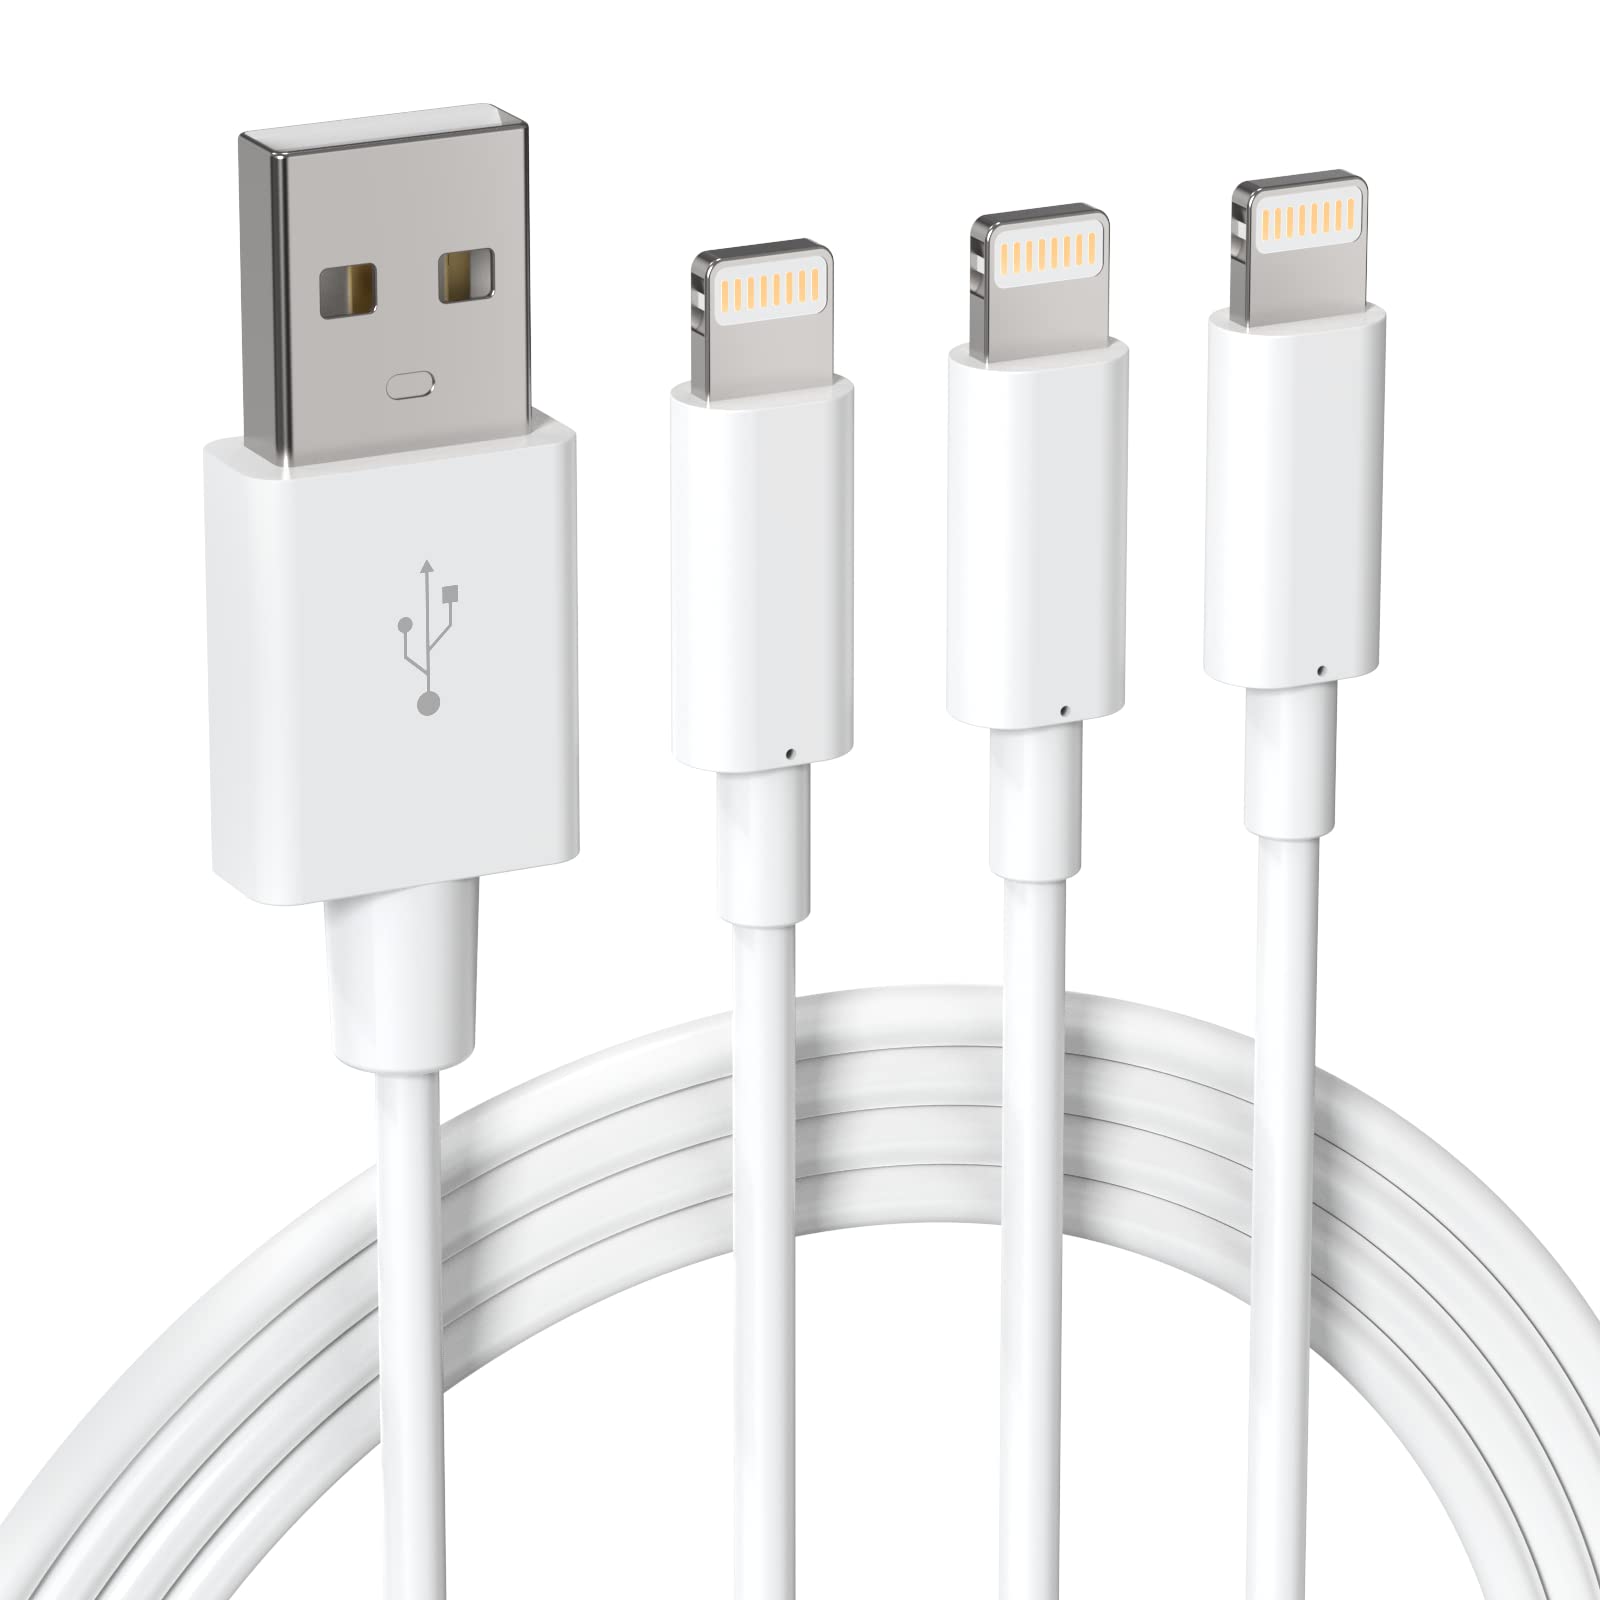 MFi Certified Lightning Cable - iPhone Charger Cable 3 Pack 6ft - ilikable Durable iPhone Charging Cable Cord for iPhone 14 13 12 11 Mini Pro XR Xs Max X SE 8 Plus 7 Plus 6S Plus iPad AirPods